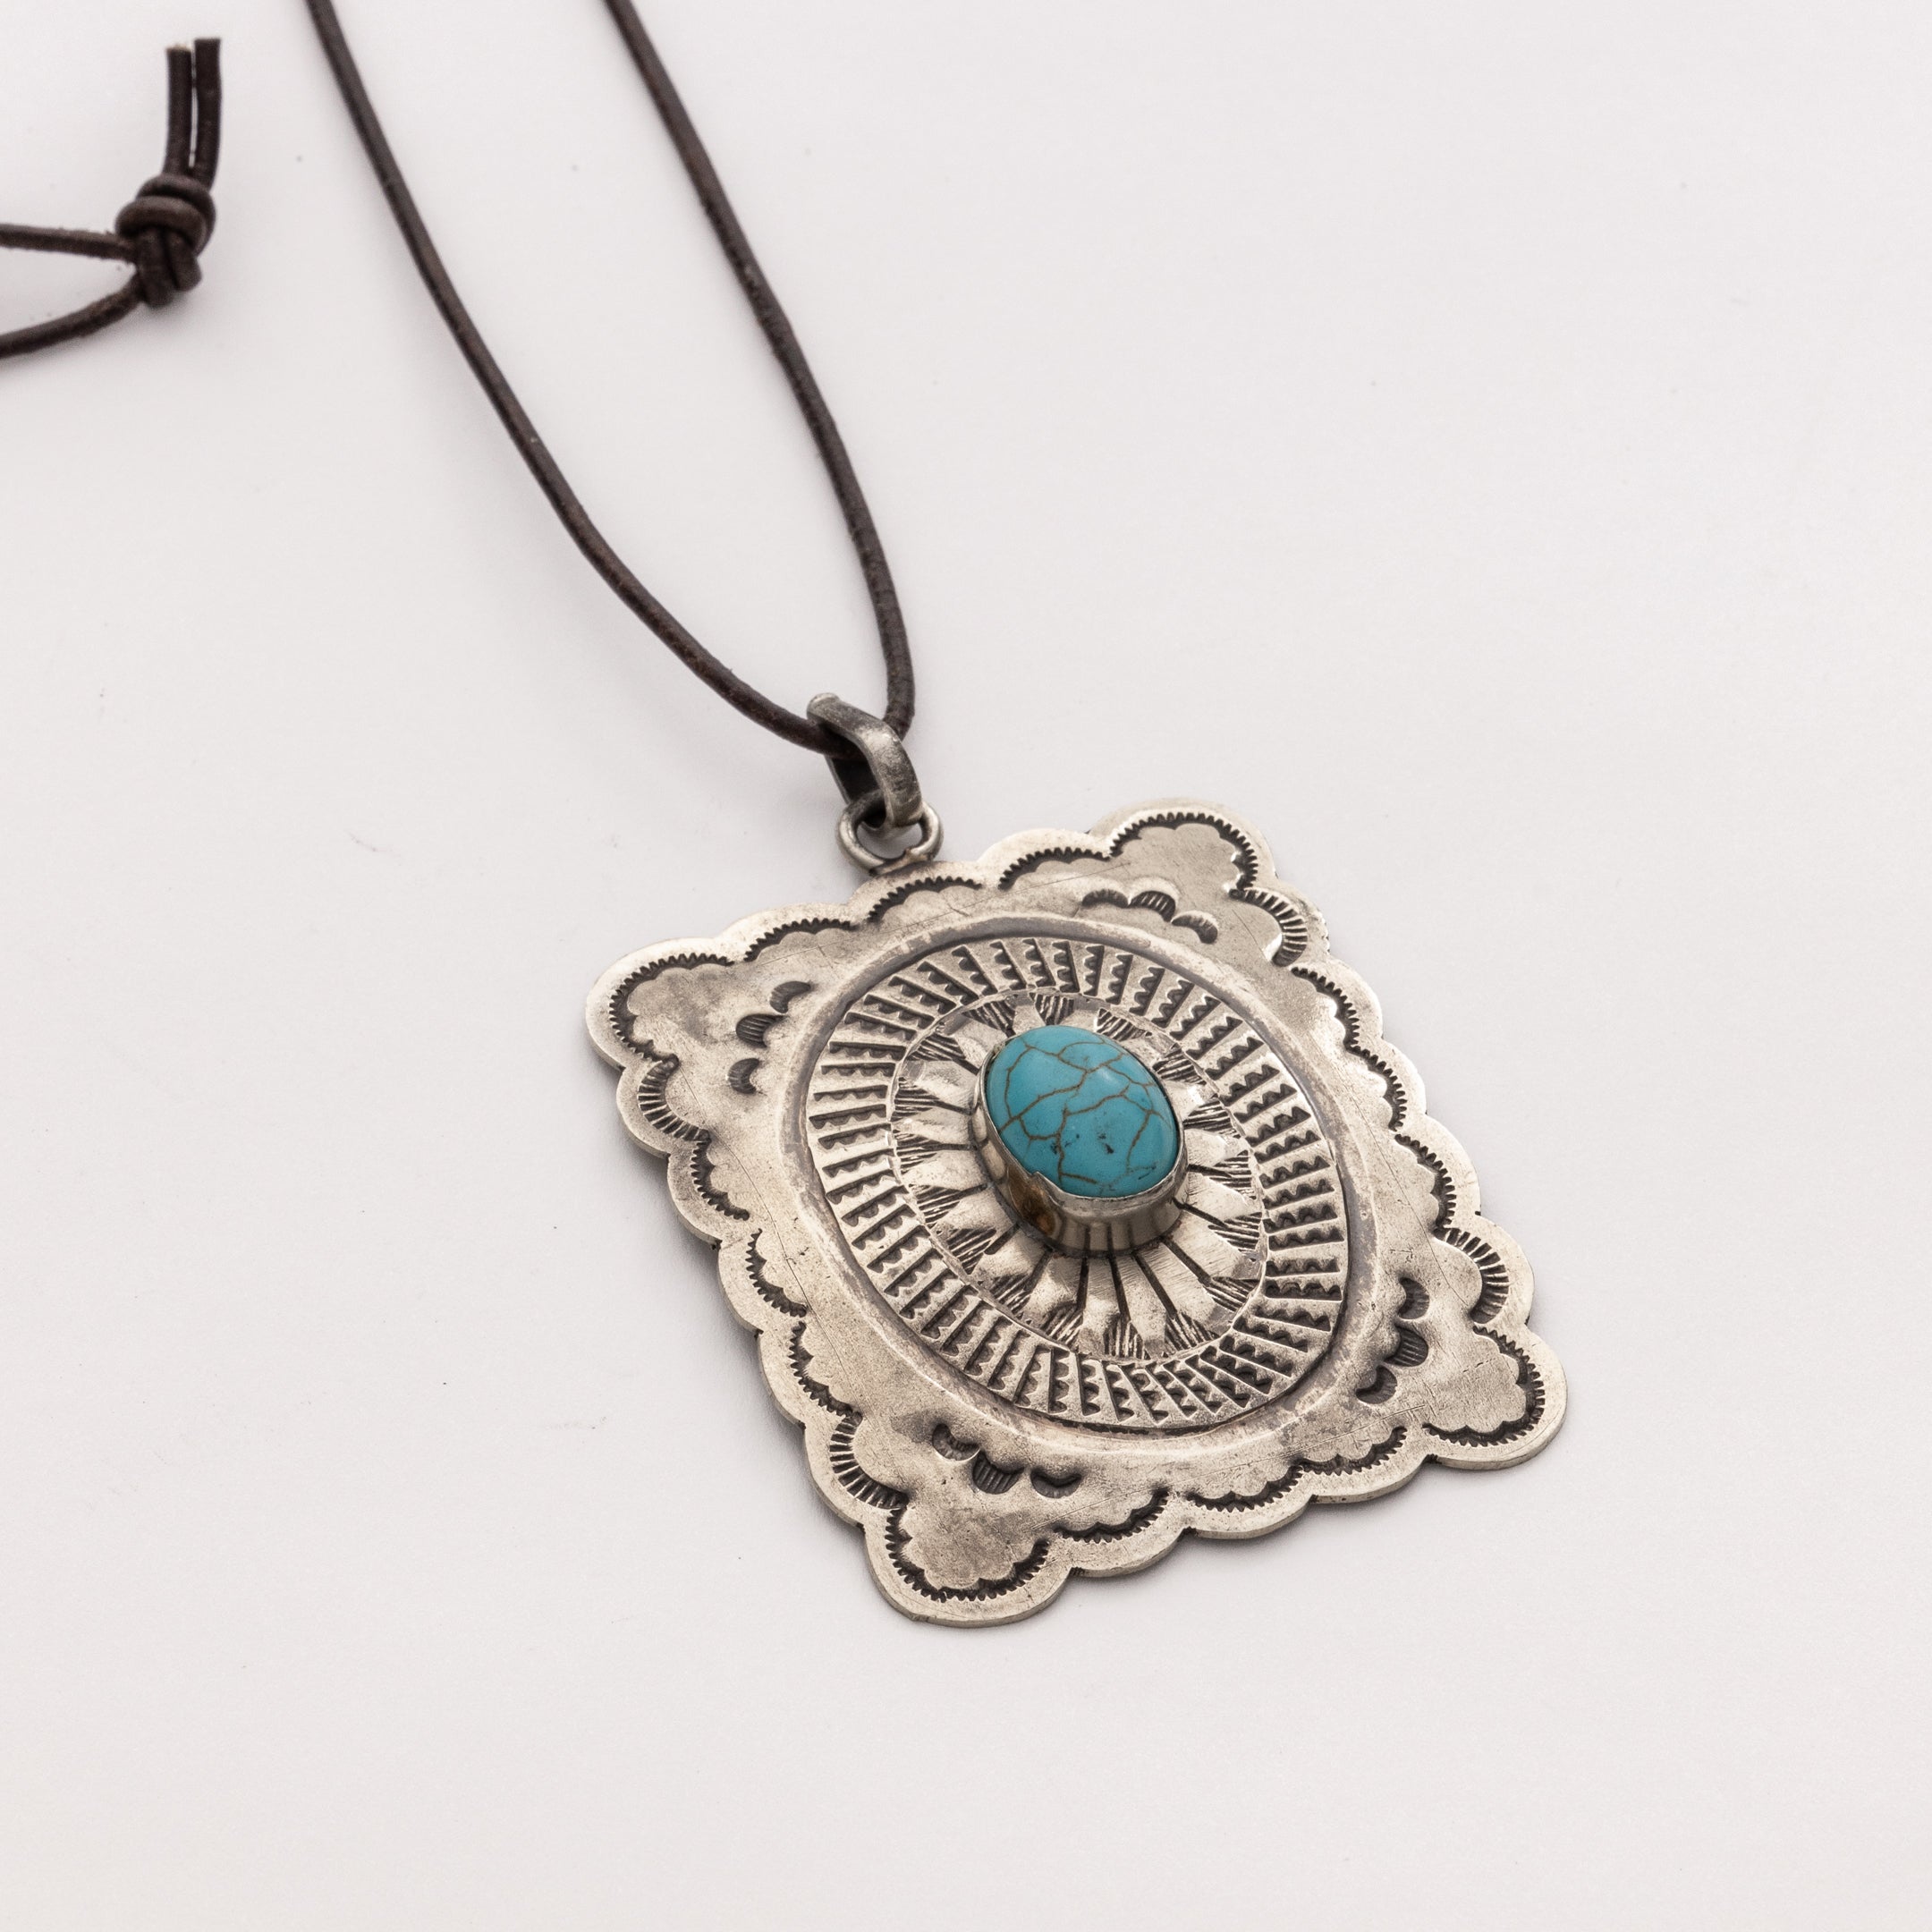 WJA-085-1 STAMPED SCALLOP EDGE PENDANT-NECKLACE